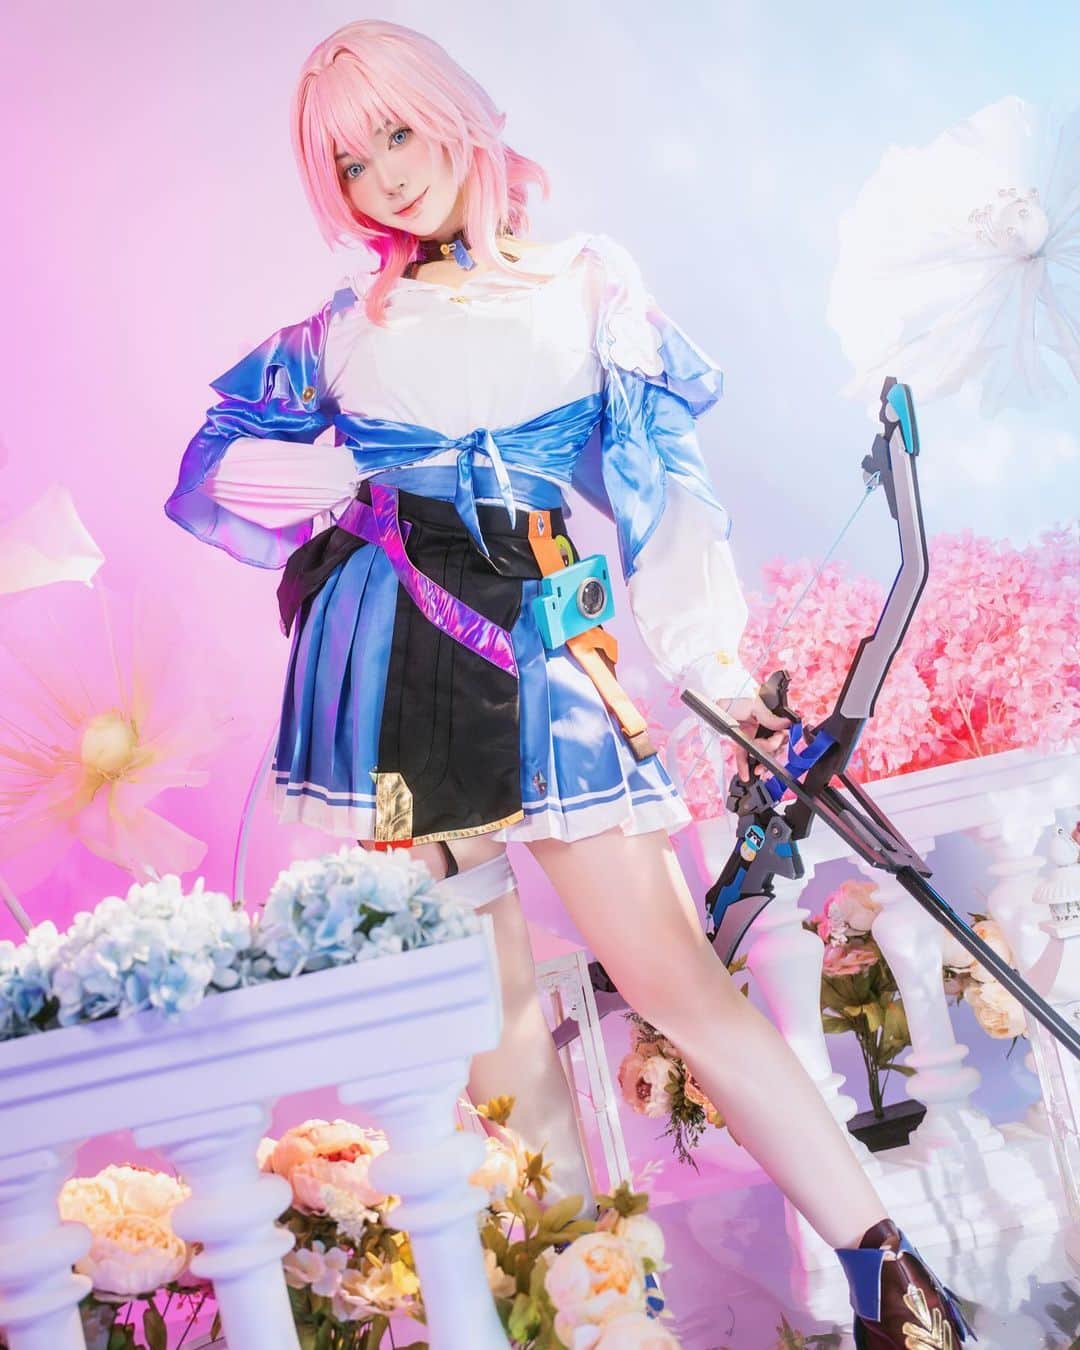 YingTzeのインスタグラム：「“ You can’t run ! “ ❄️   I play Honkai Star Rail with English Voice-over and I think March 7th is really cute 🤣🤚✨  March 7th is Set A for this month’s photo set 💖 25 HD photos + 14 Selfies in this set . Last day to pledge is on 30th September ✨  📸 @prestonles.ig  Studio @peoplegraphy」